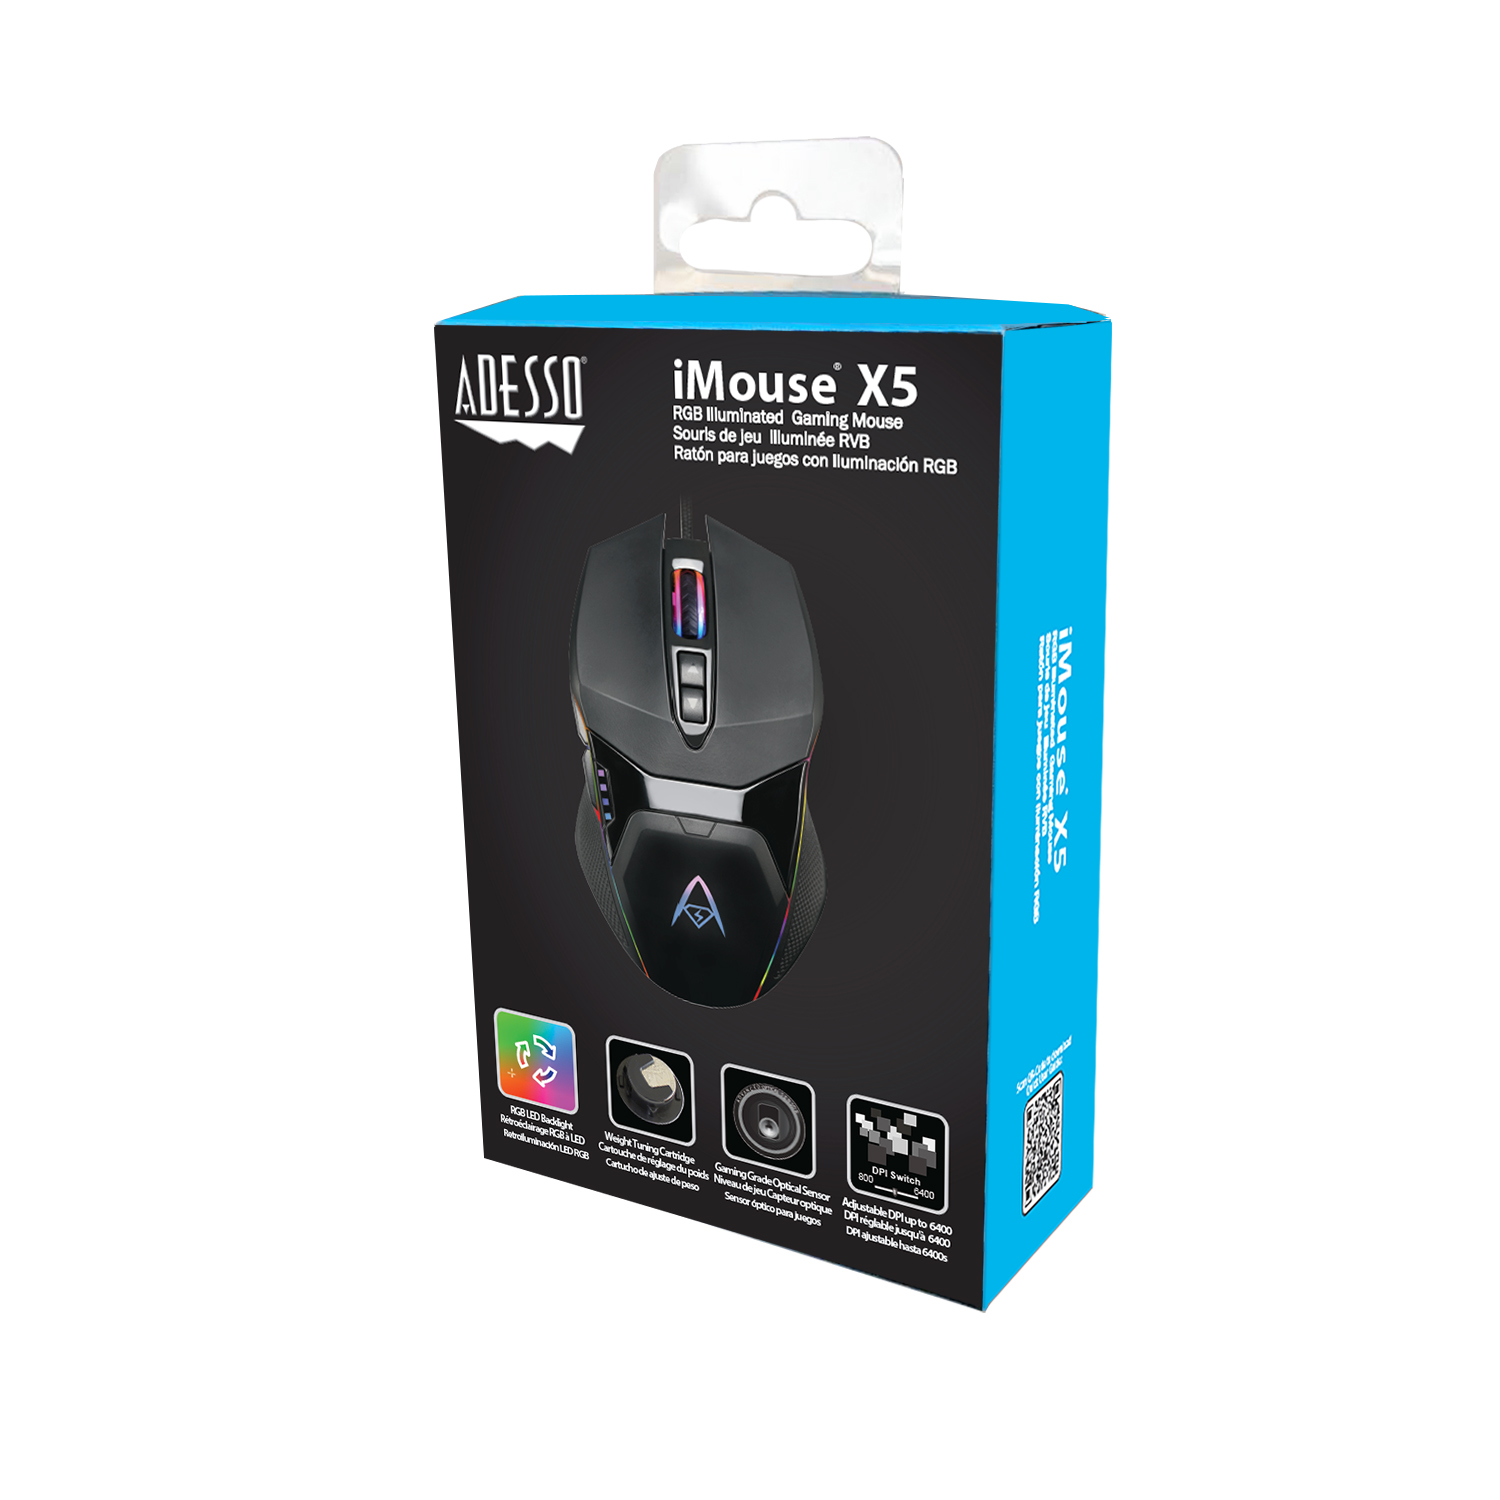 Illuminated 7-Button Ambidextrous Gaming Mouse - Adesso Inc 